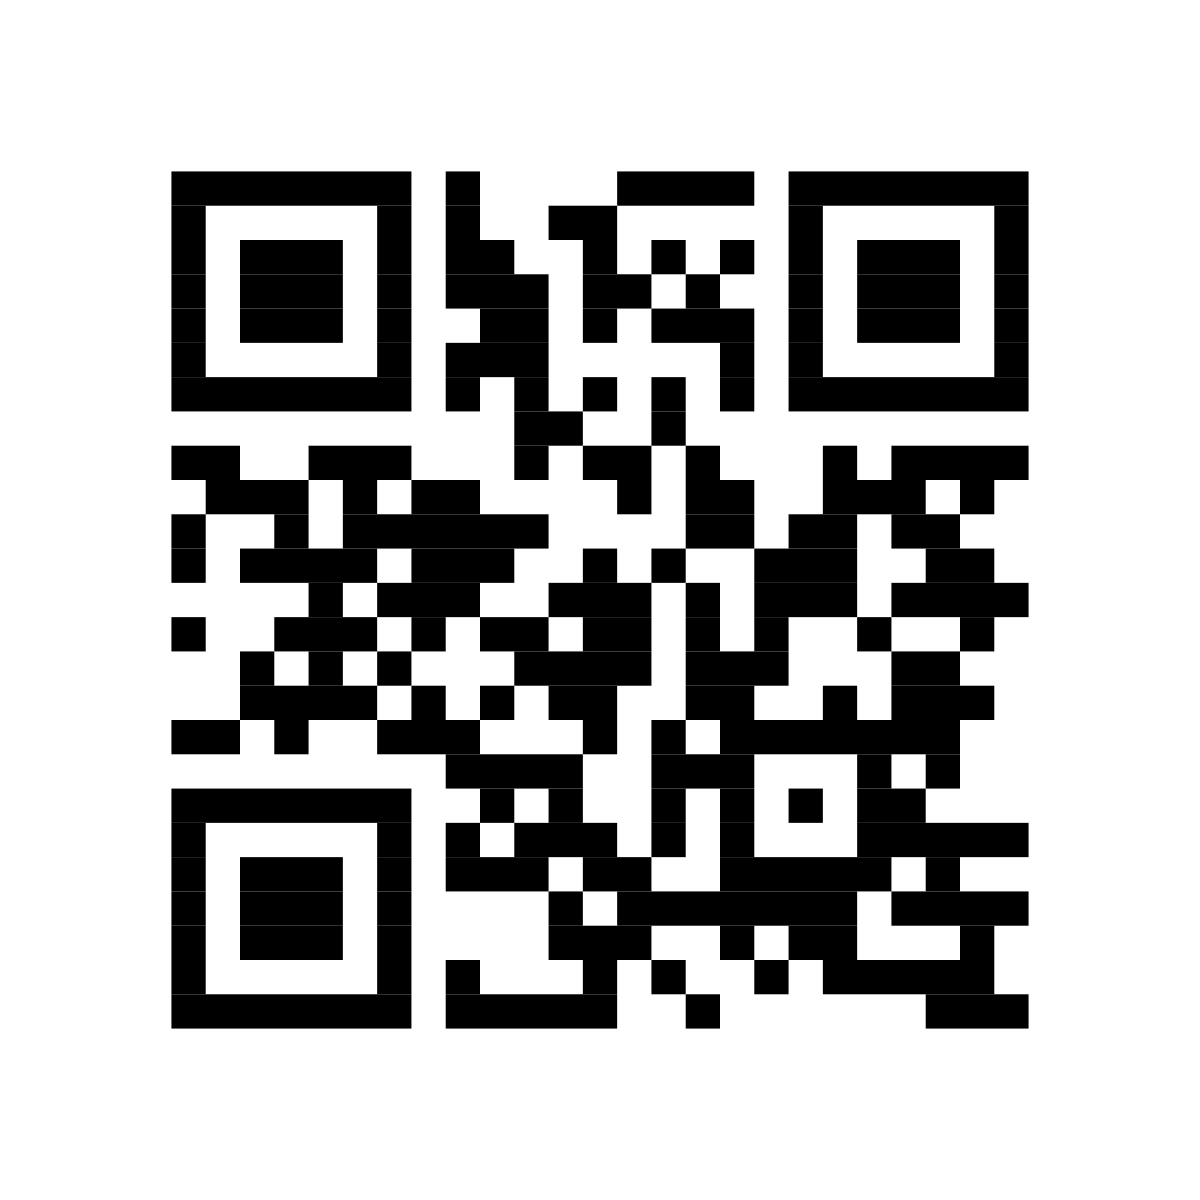 Download File:QRpedia QR-Code.svg - Wikimedia Commons